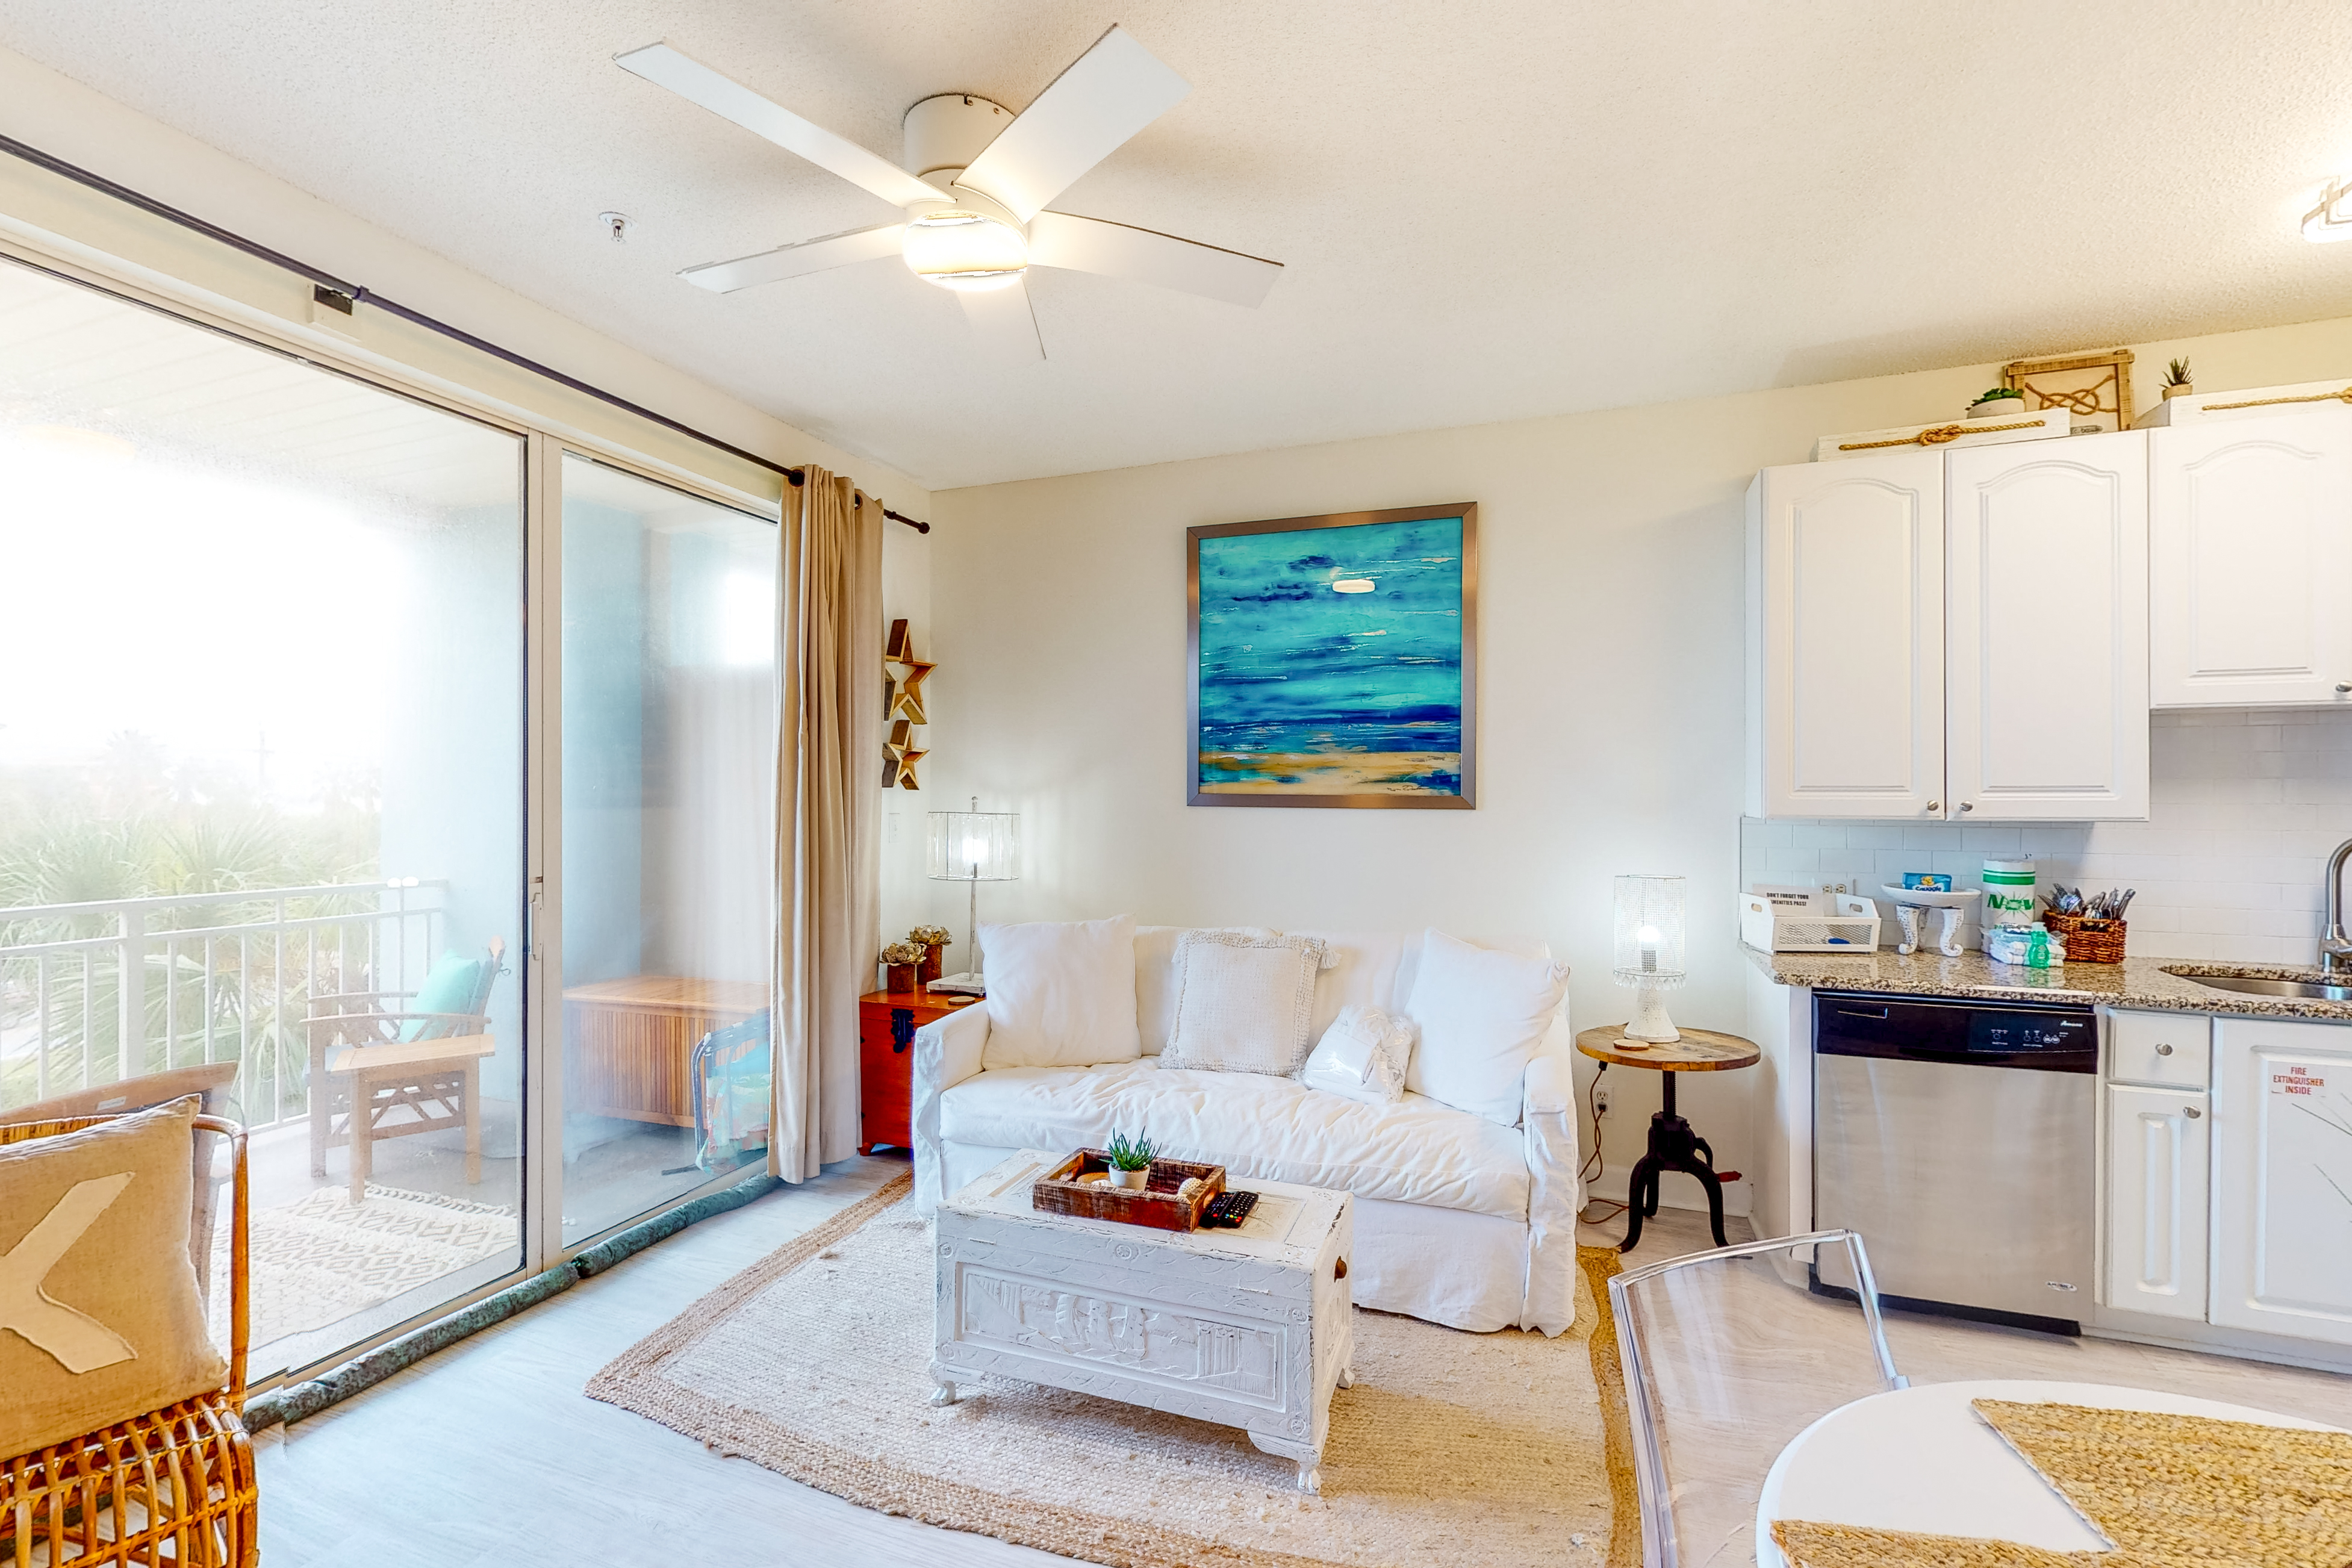 Gulf Place Cabanas 302 Condo rental in Gulf Place Cabanas ~ Santa Rosa Beach Vacation Rentals by BeachGuide 30a in Highway 30-A Florida - #10